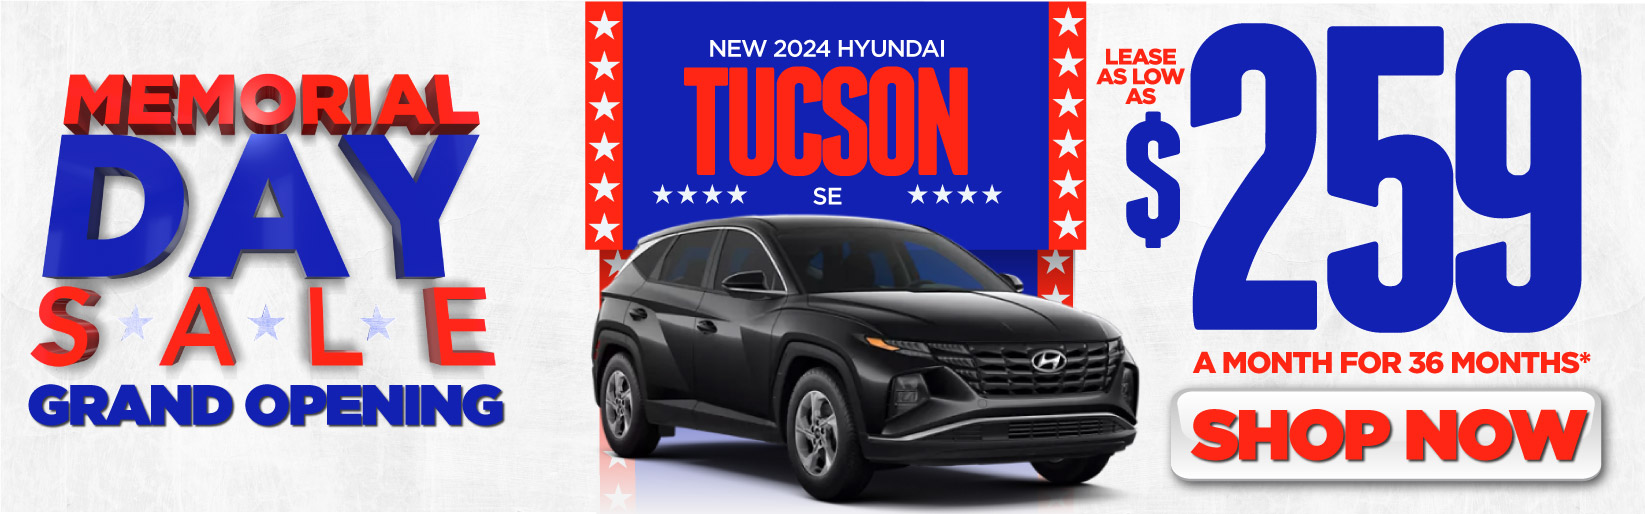 New 2024 Hyundai Tucson SE - Lease as low as $259/mo for 36 mos* – Act Now